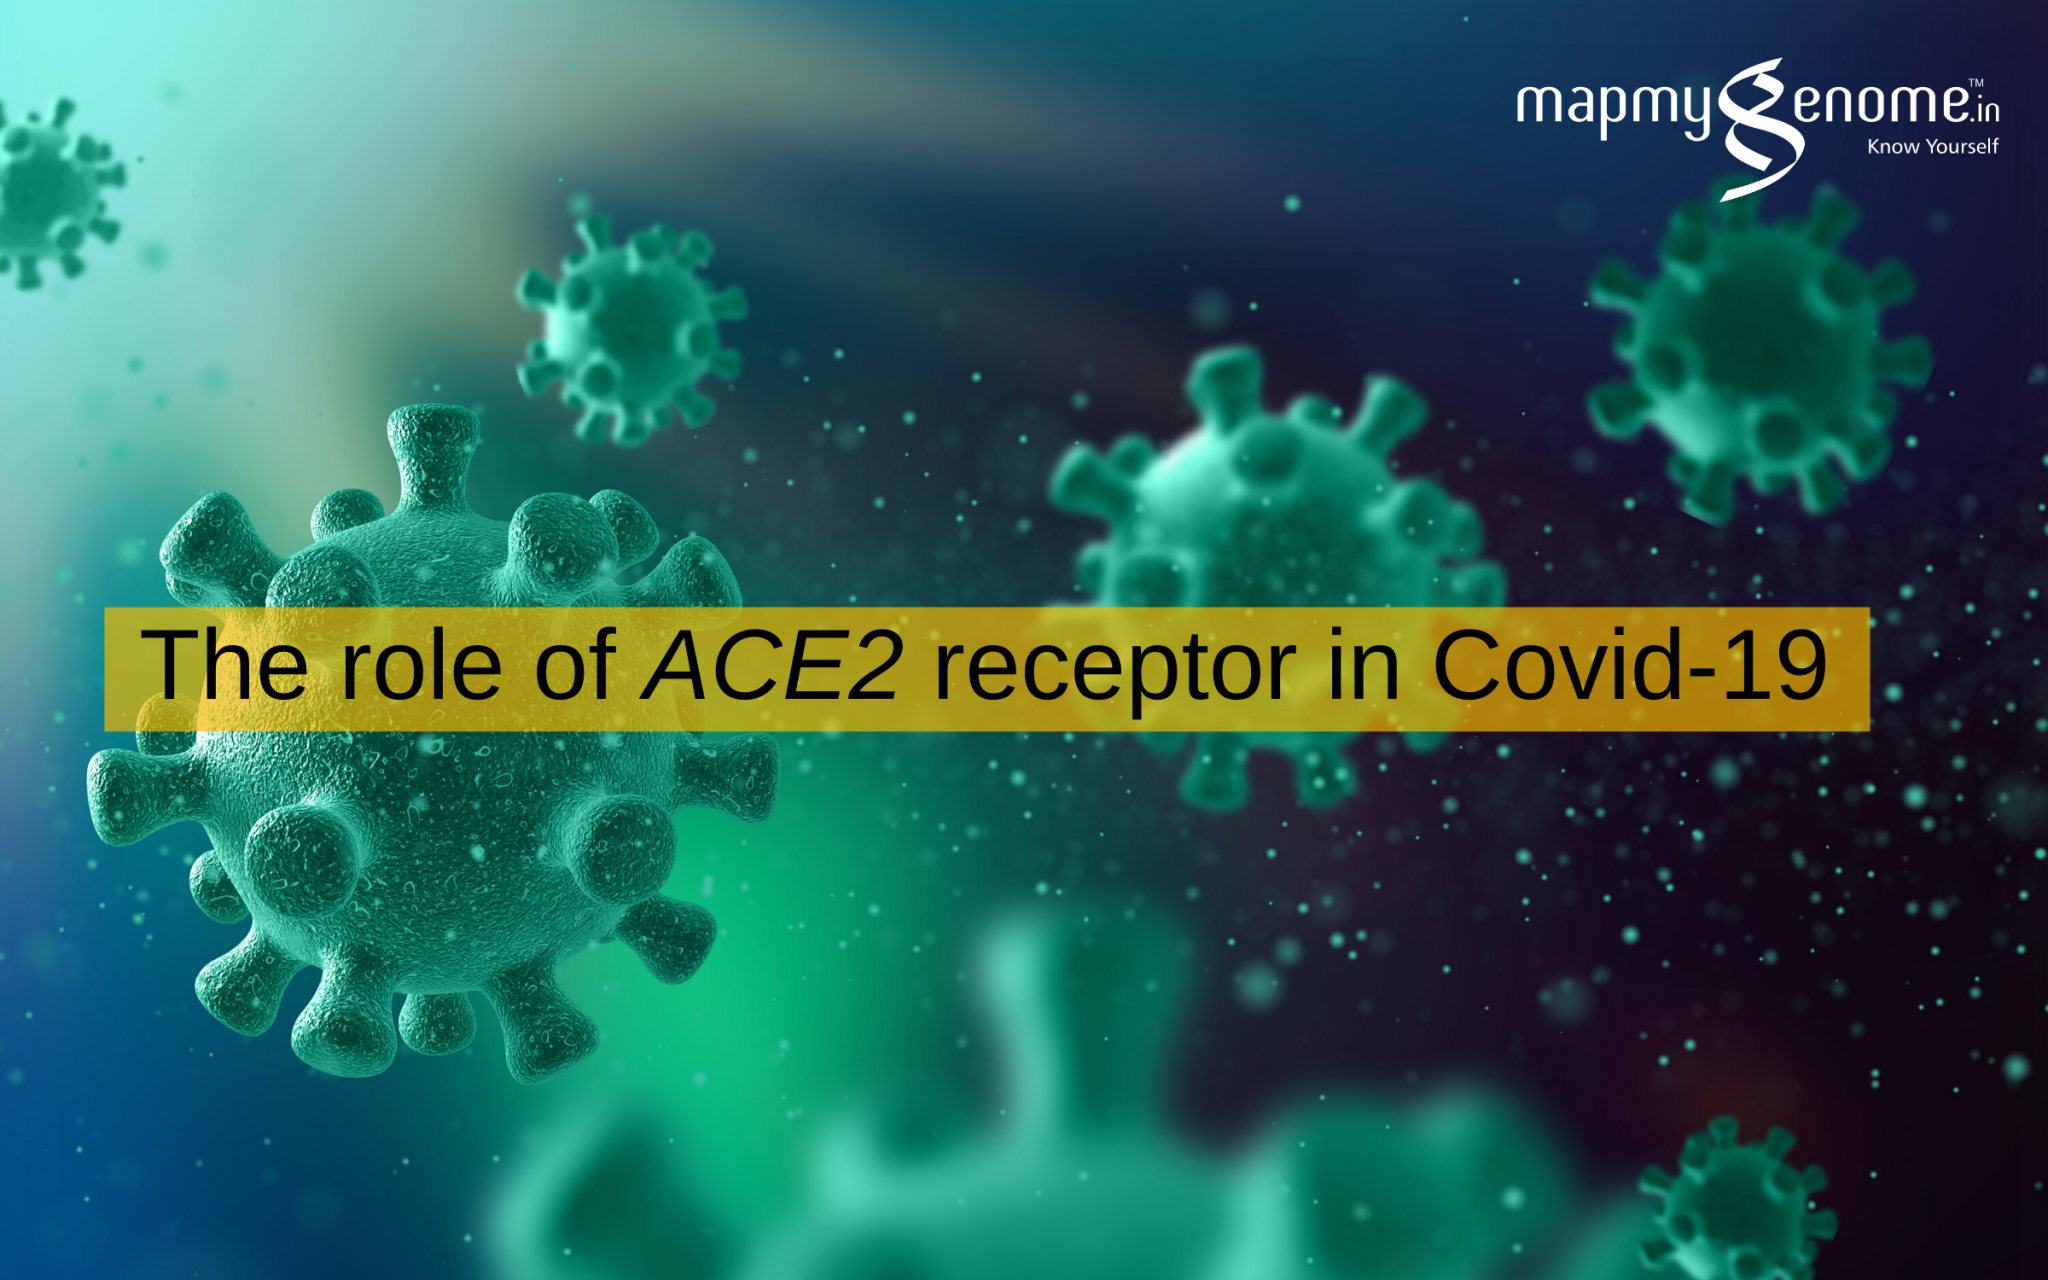 The role of ACE2 receptor in Covid-19